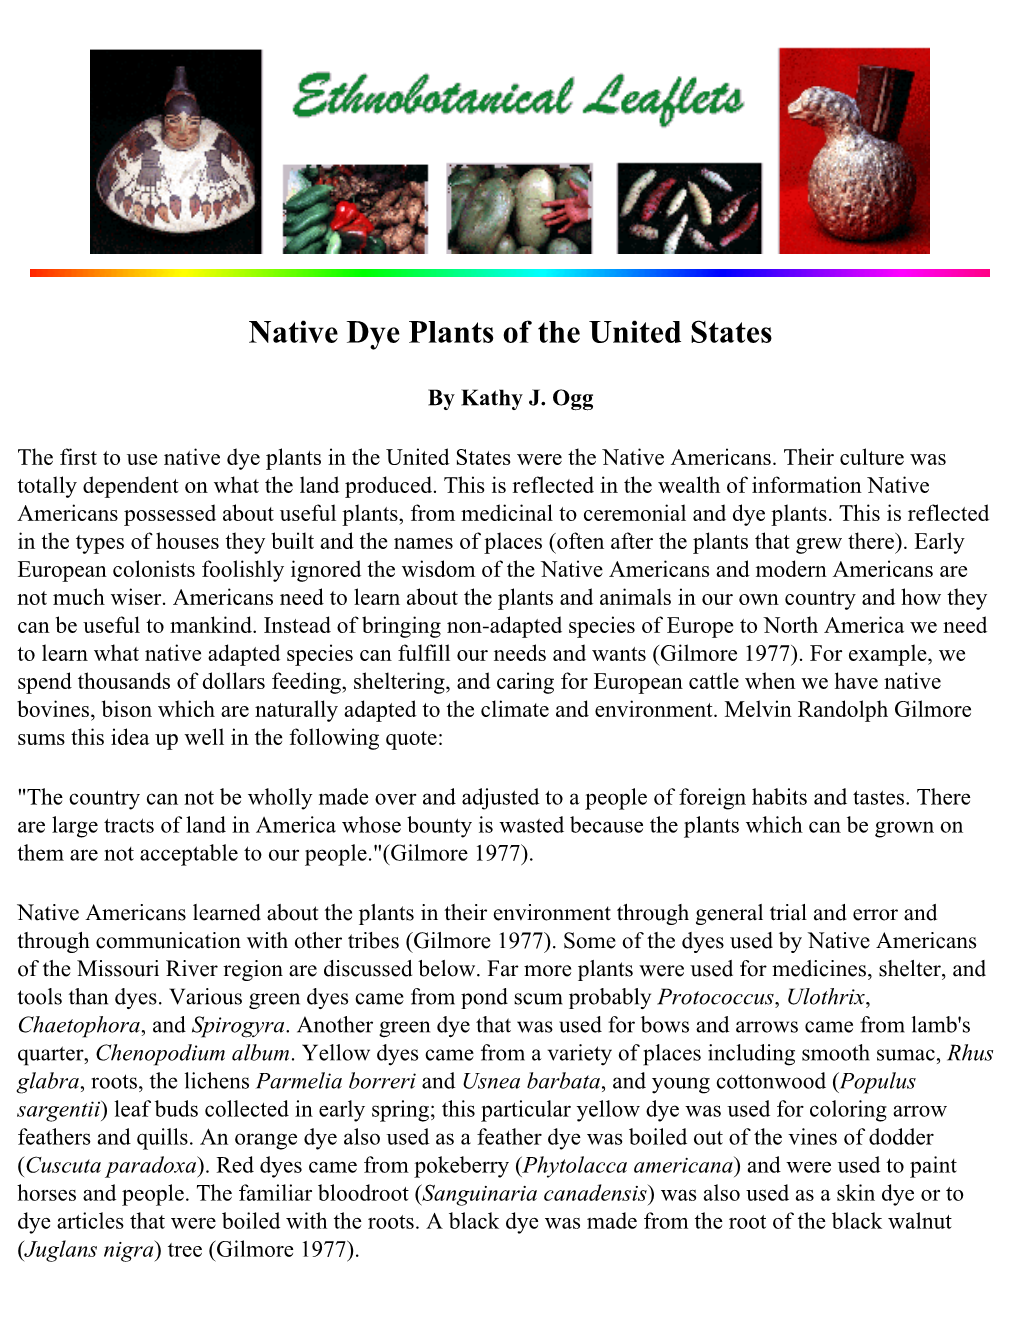 Native Dye Plants of the United States